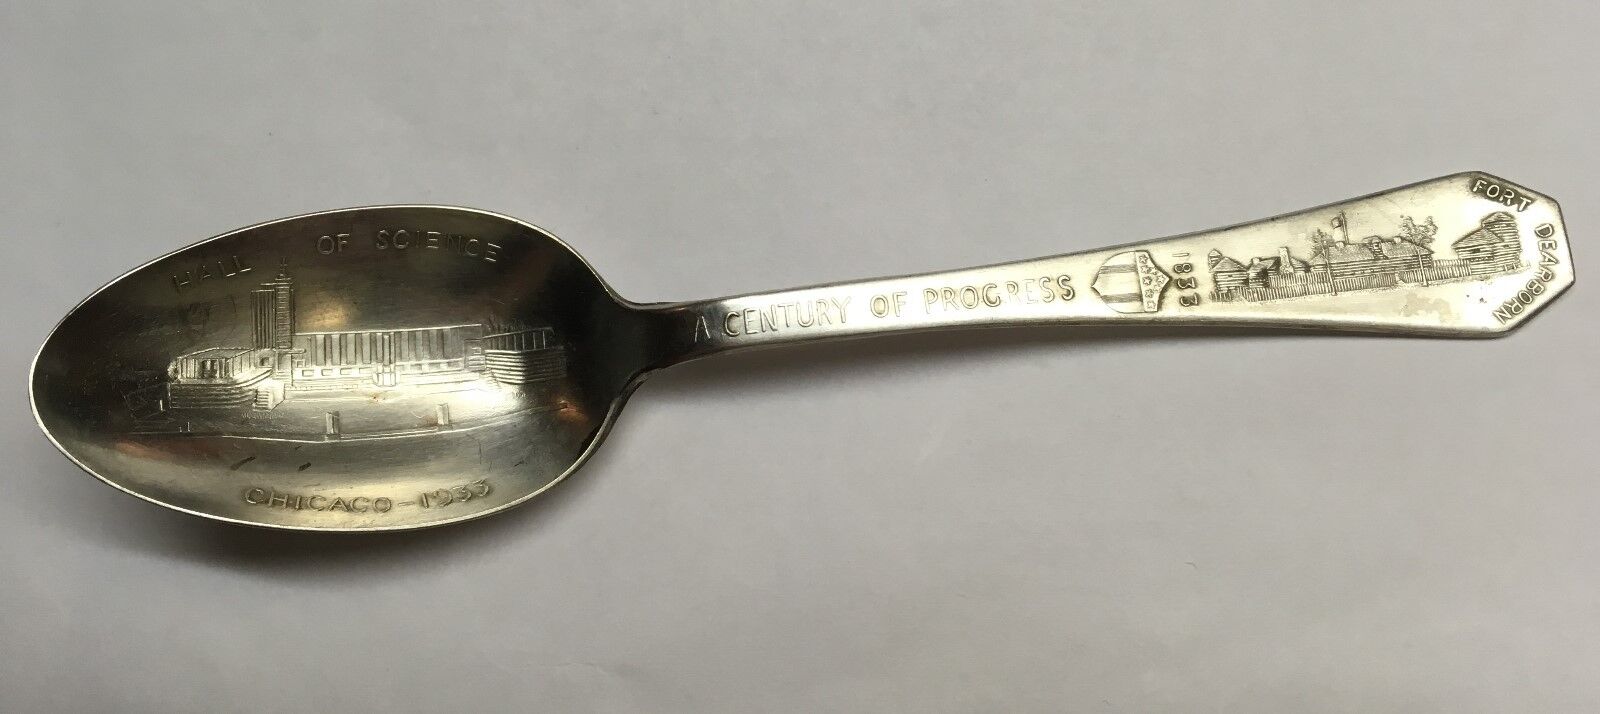 1933 Century of Progress Hall of Science Chicago Fort Dearborn Silverplate Spoon